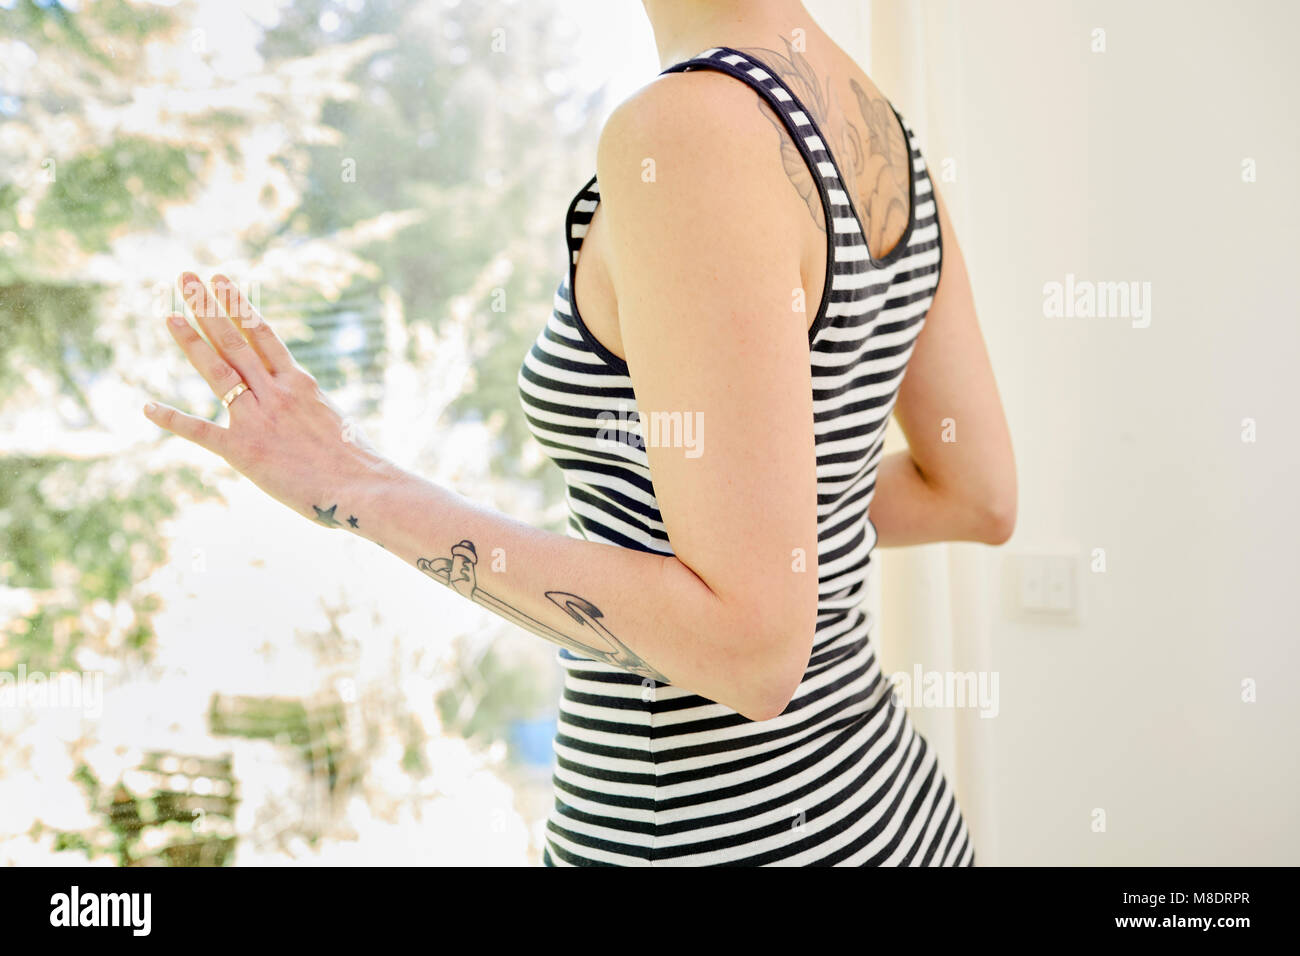 Mid adult woman, with tattoos on arm, looking out of window, mid section Stock Photo